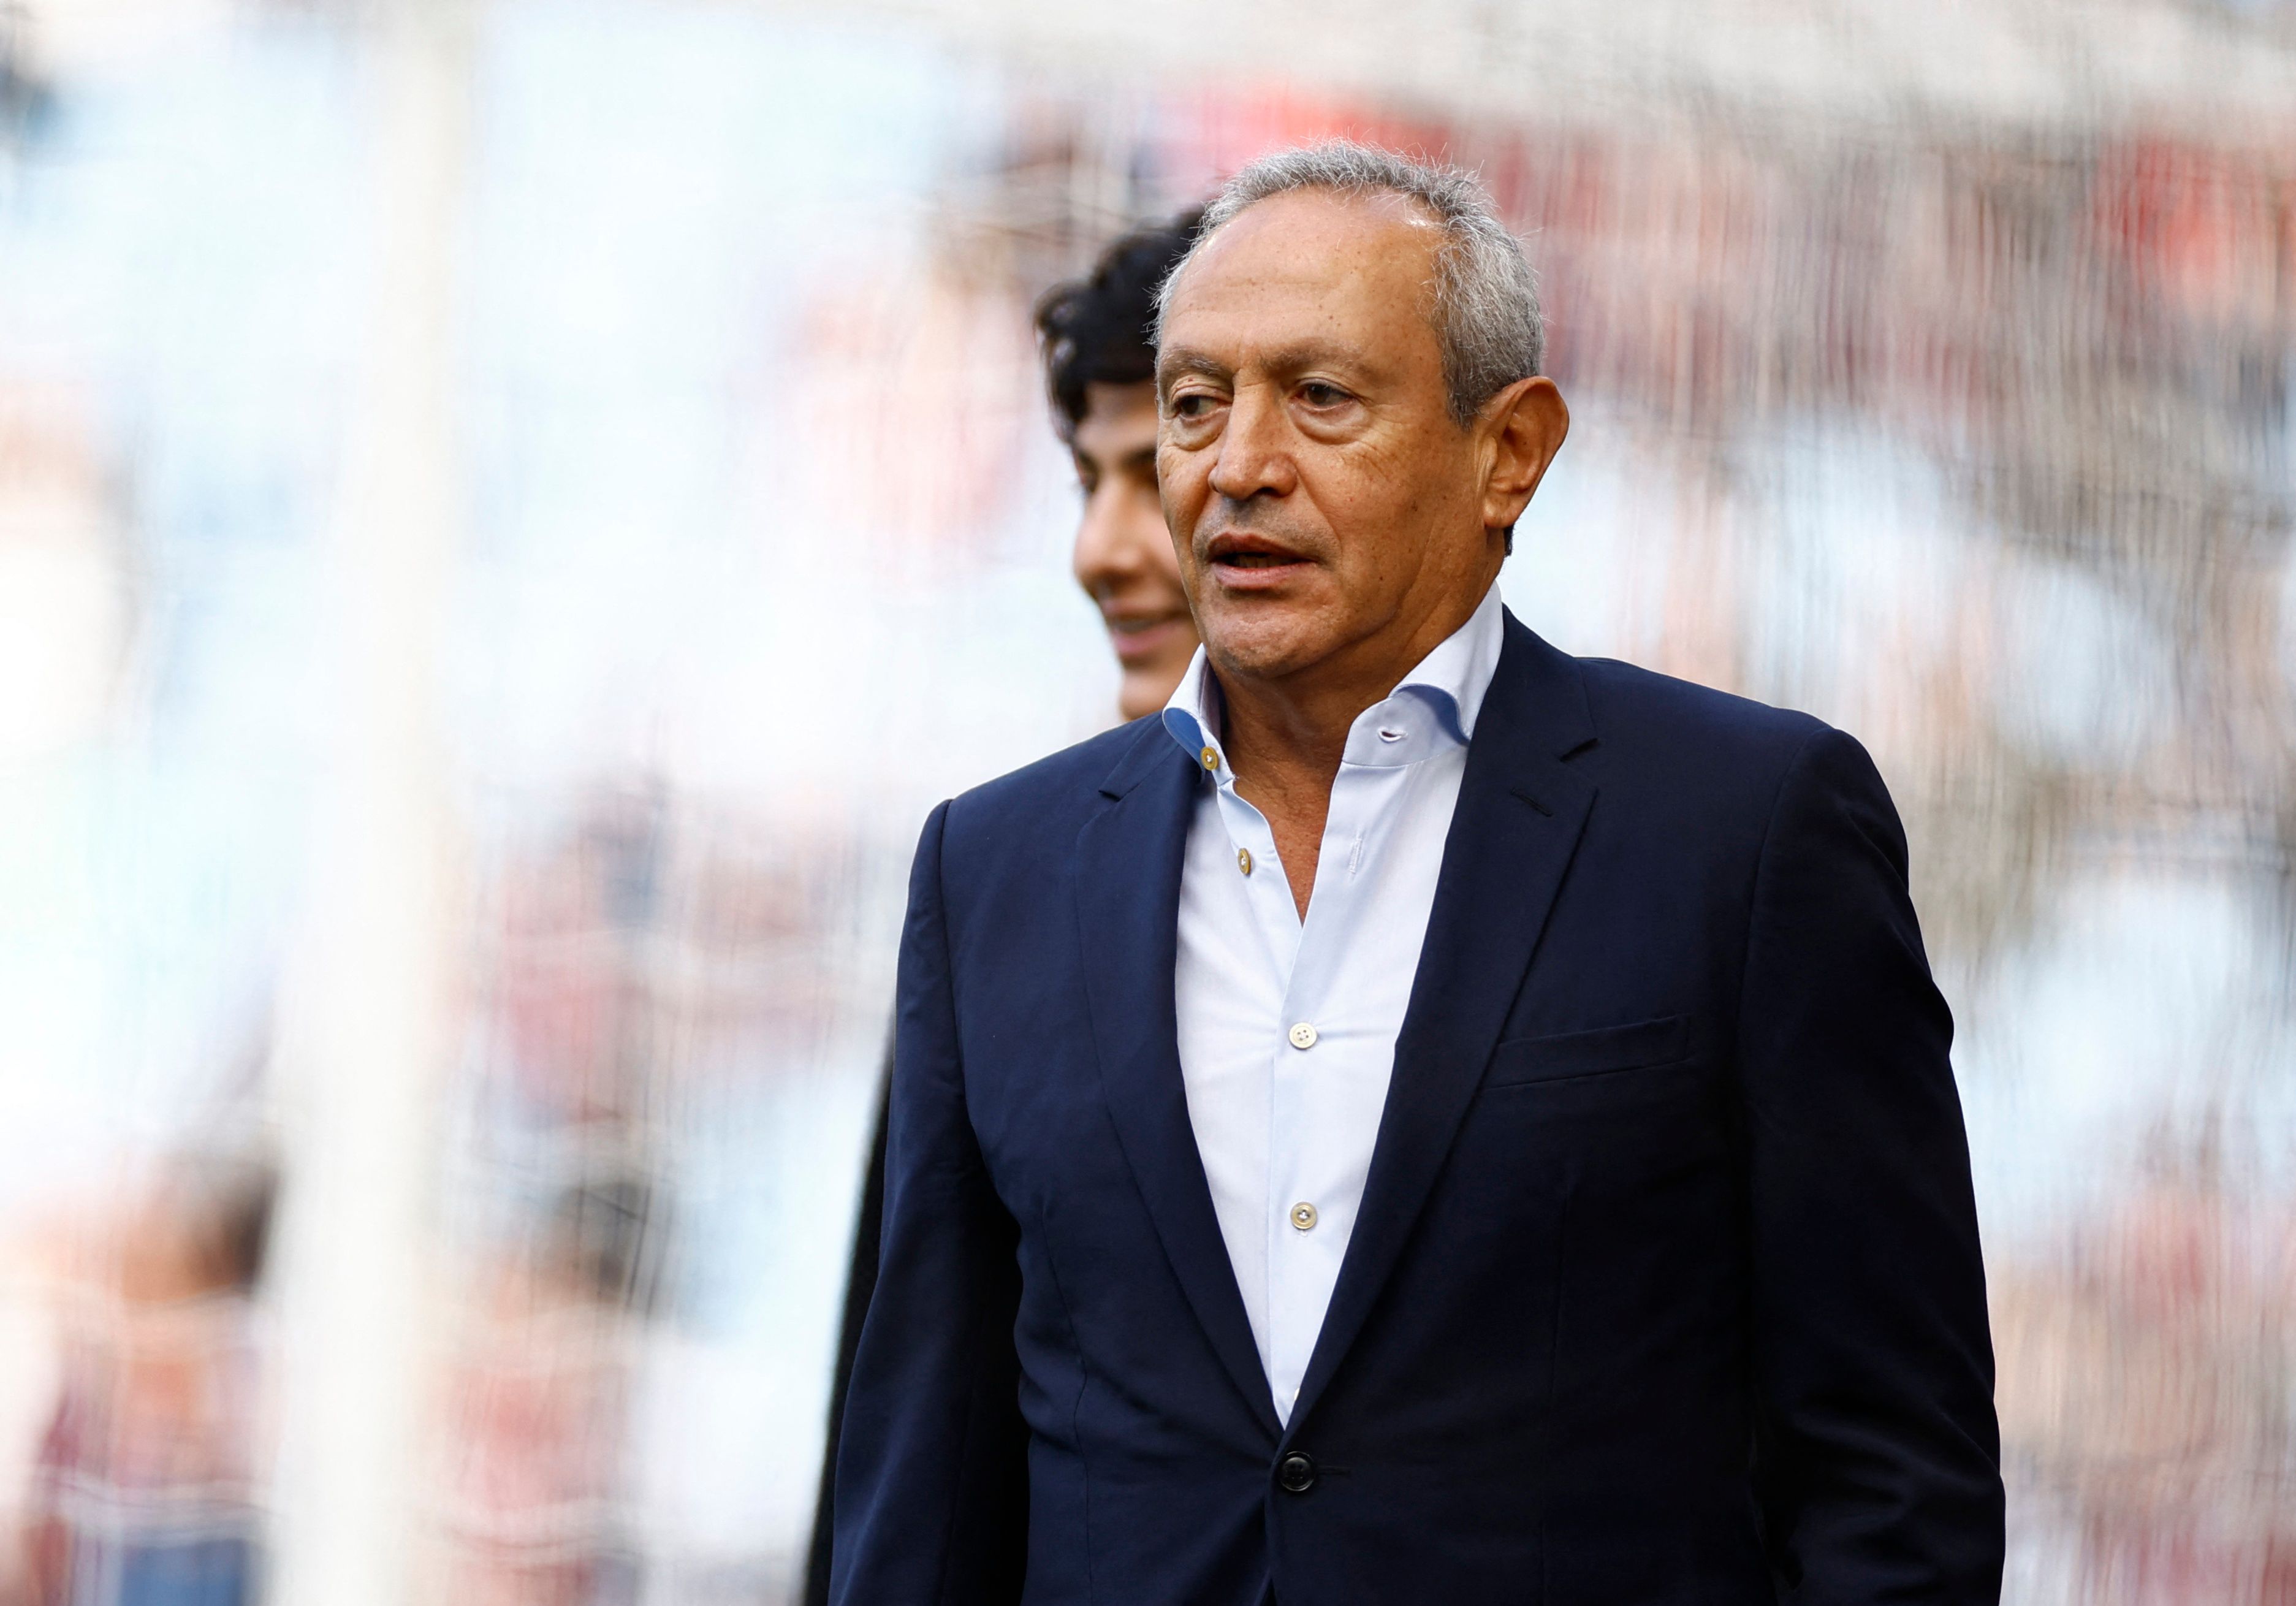 Aston Villa co-owner Nassef Sawiris on the pitch